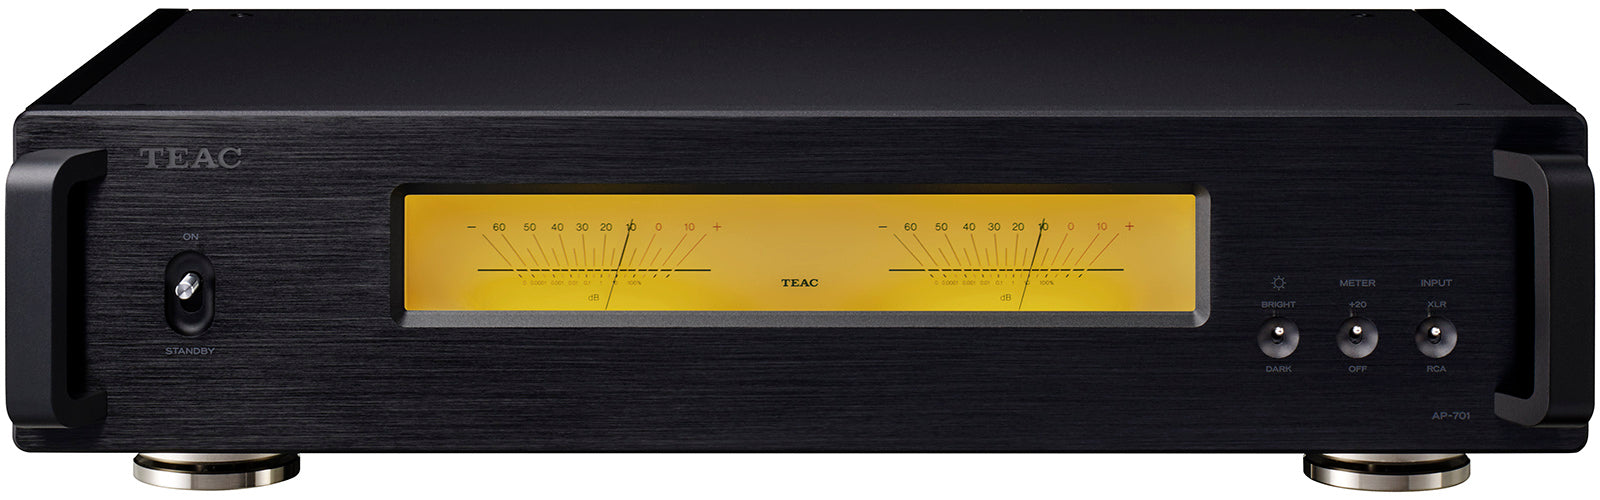 TEAC AP-701 Stereo Power Amplifier - Safe and Sound HQ